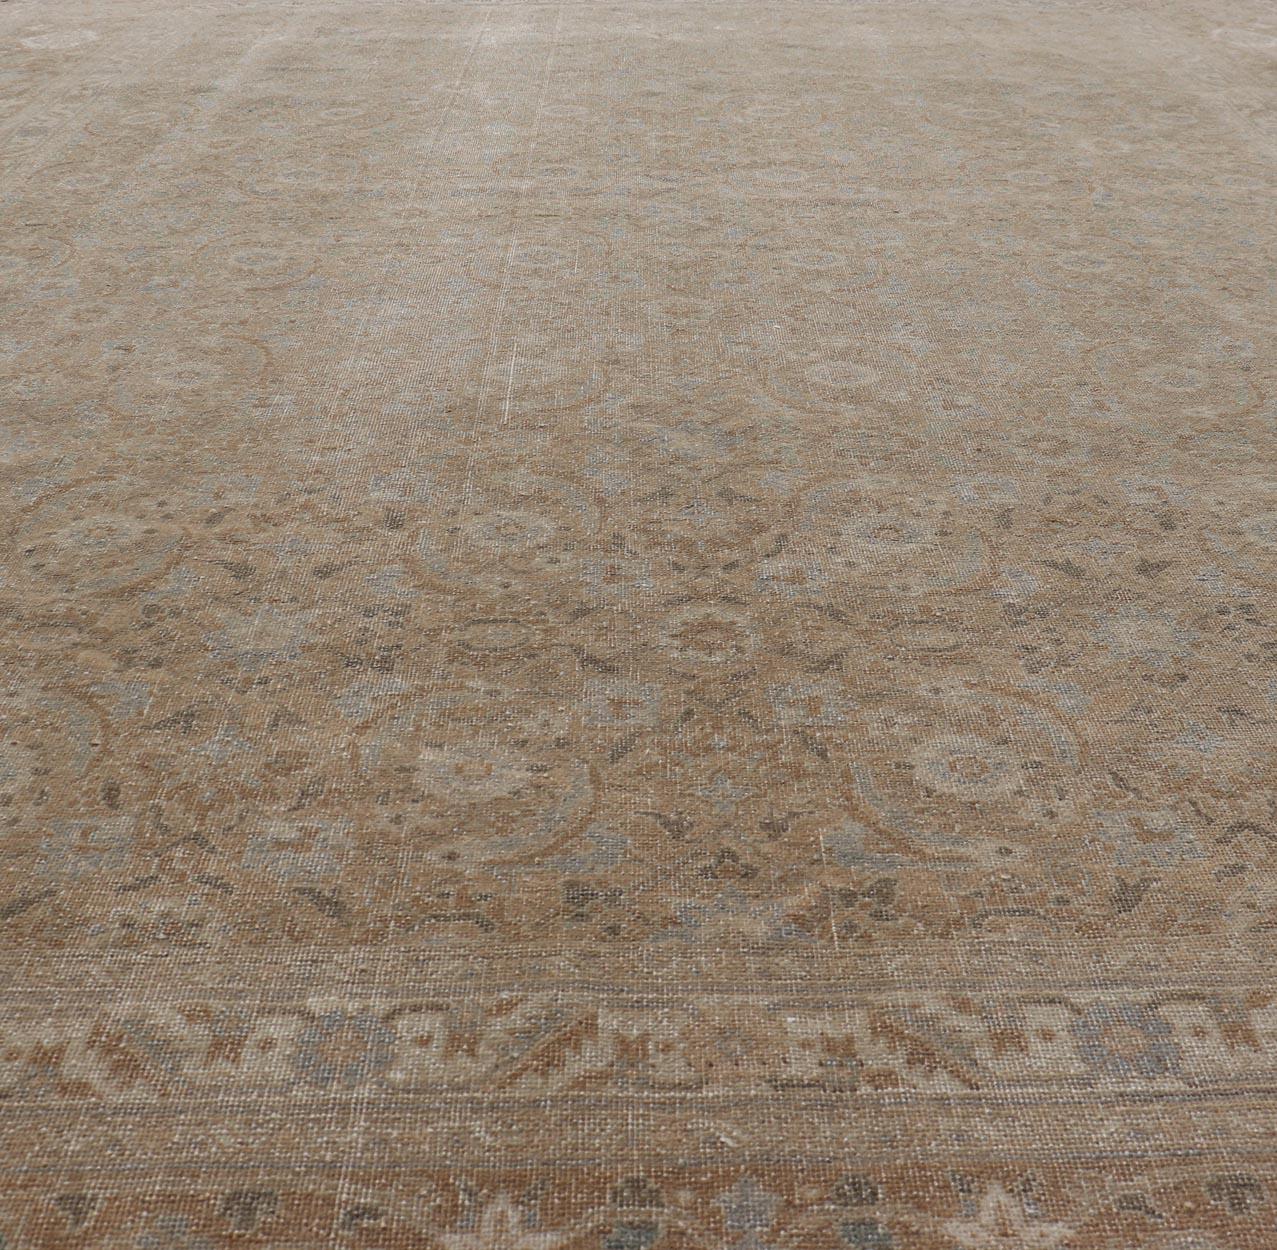 Antique Persian Tabriz Rug in Wool with All-Over Floral Design in Earth Colors For Sale 6